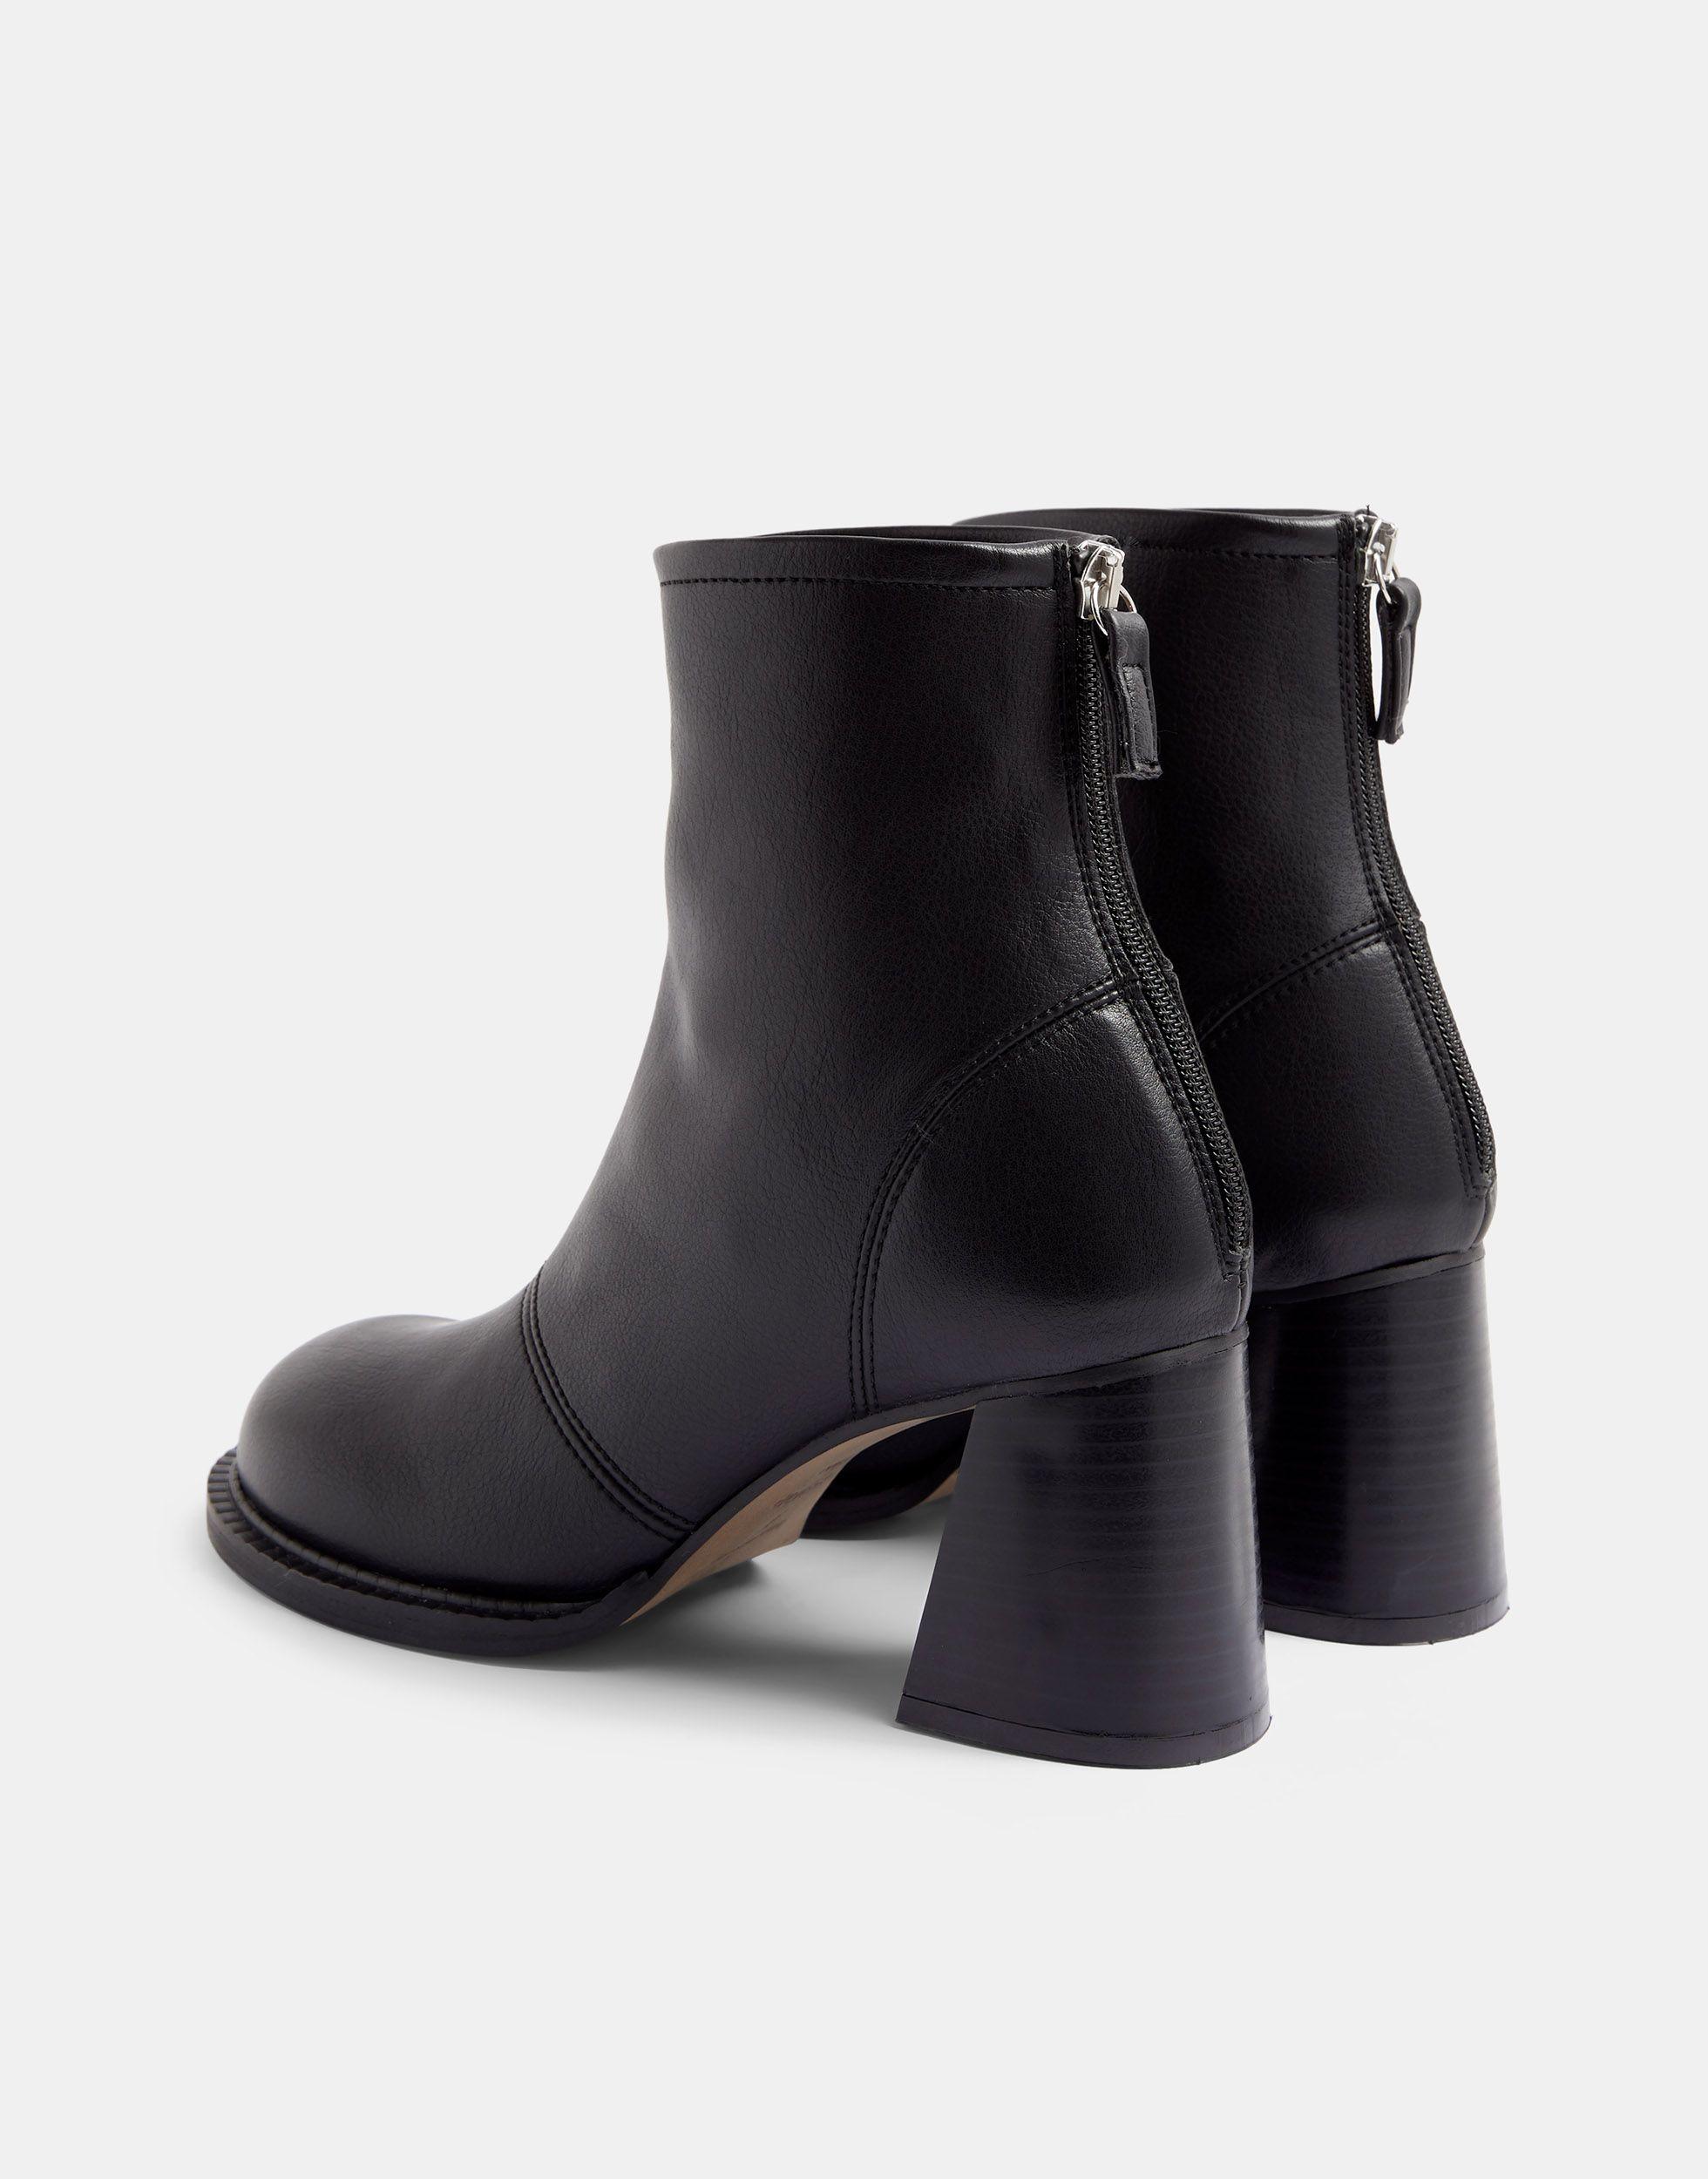 TOPSHOP Round Toe Skinny Heeled Boots in Black | Lyst